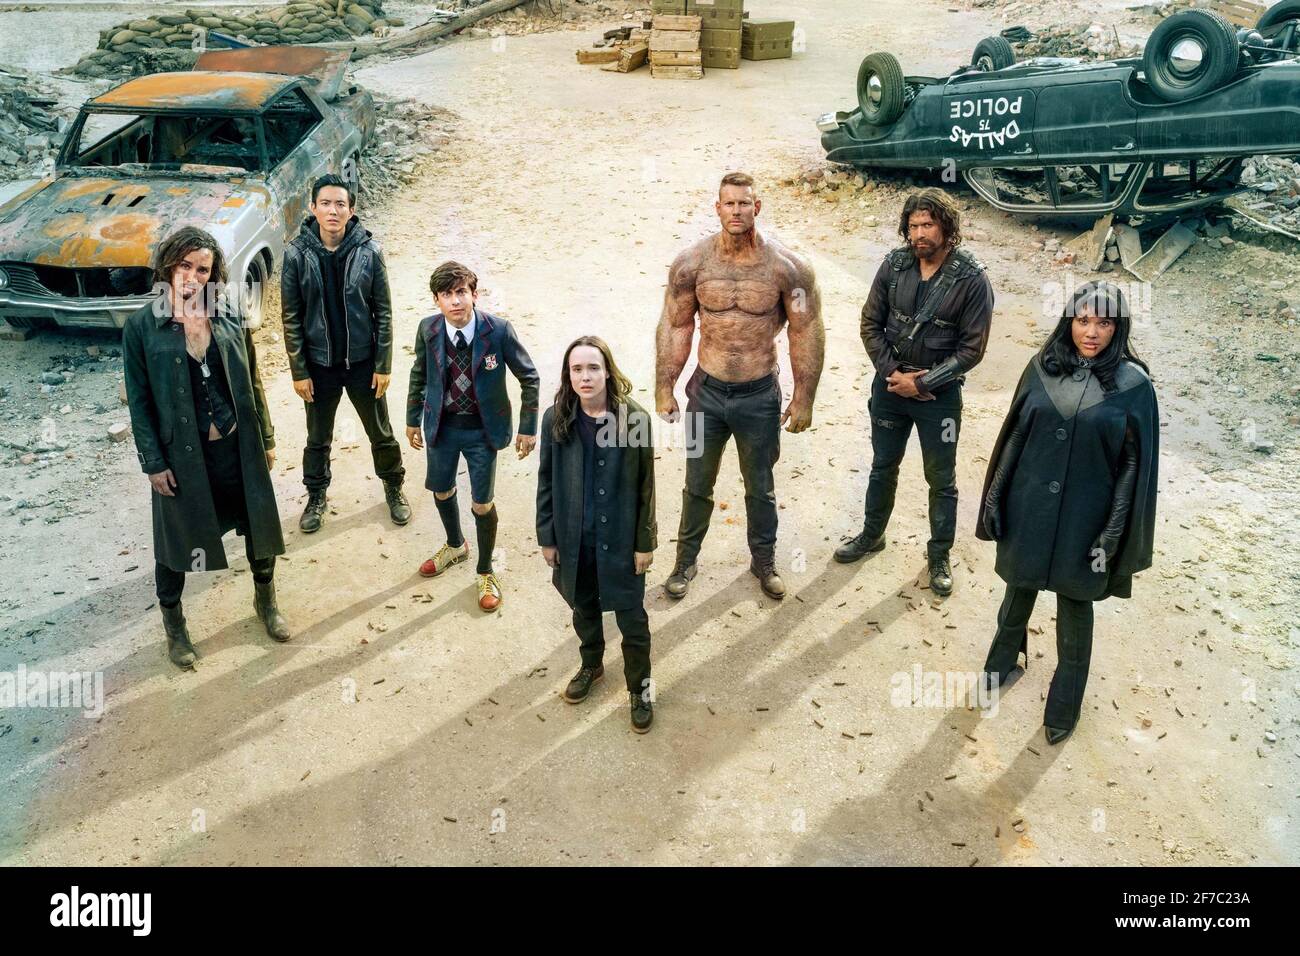 The Umbrella Academy (TV series): Elliot Page as Vanya Hargreeves, Tom Hopper as Luther Hargreeves, David Castañeda as Diego Hargreeves, Emmy Raver-Lampman as Allison Hargreeves, Robert Sheehan as Klaus Hargreeves, Aidan Gallagher as Five Hargreeves Stock Photo